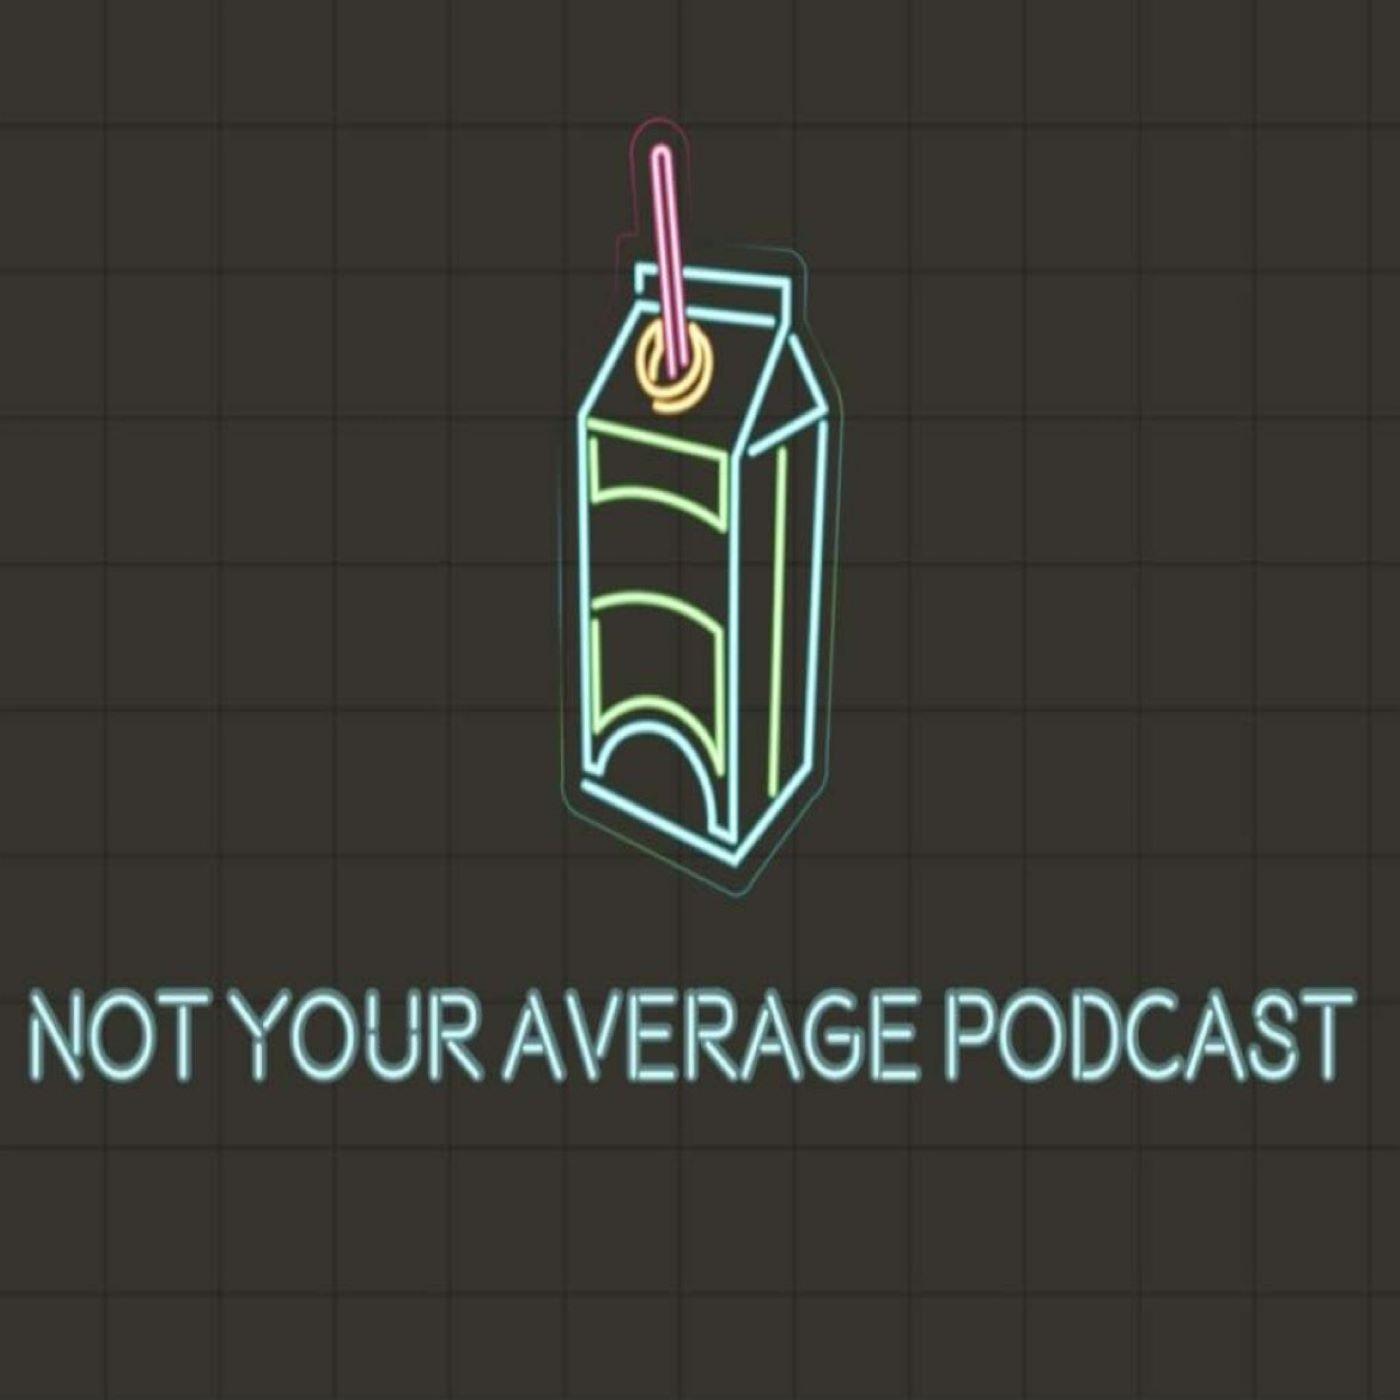 It's Not Your Average Podcast